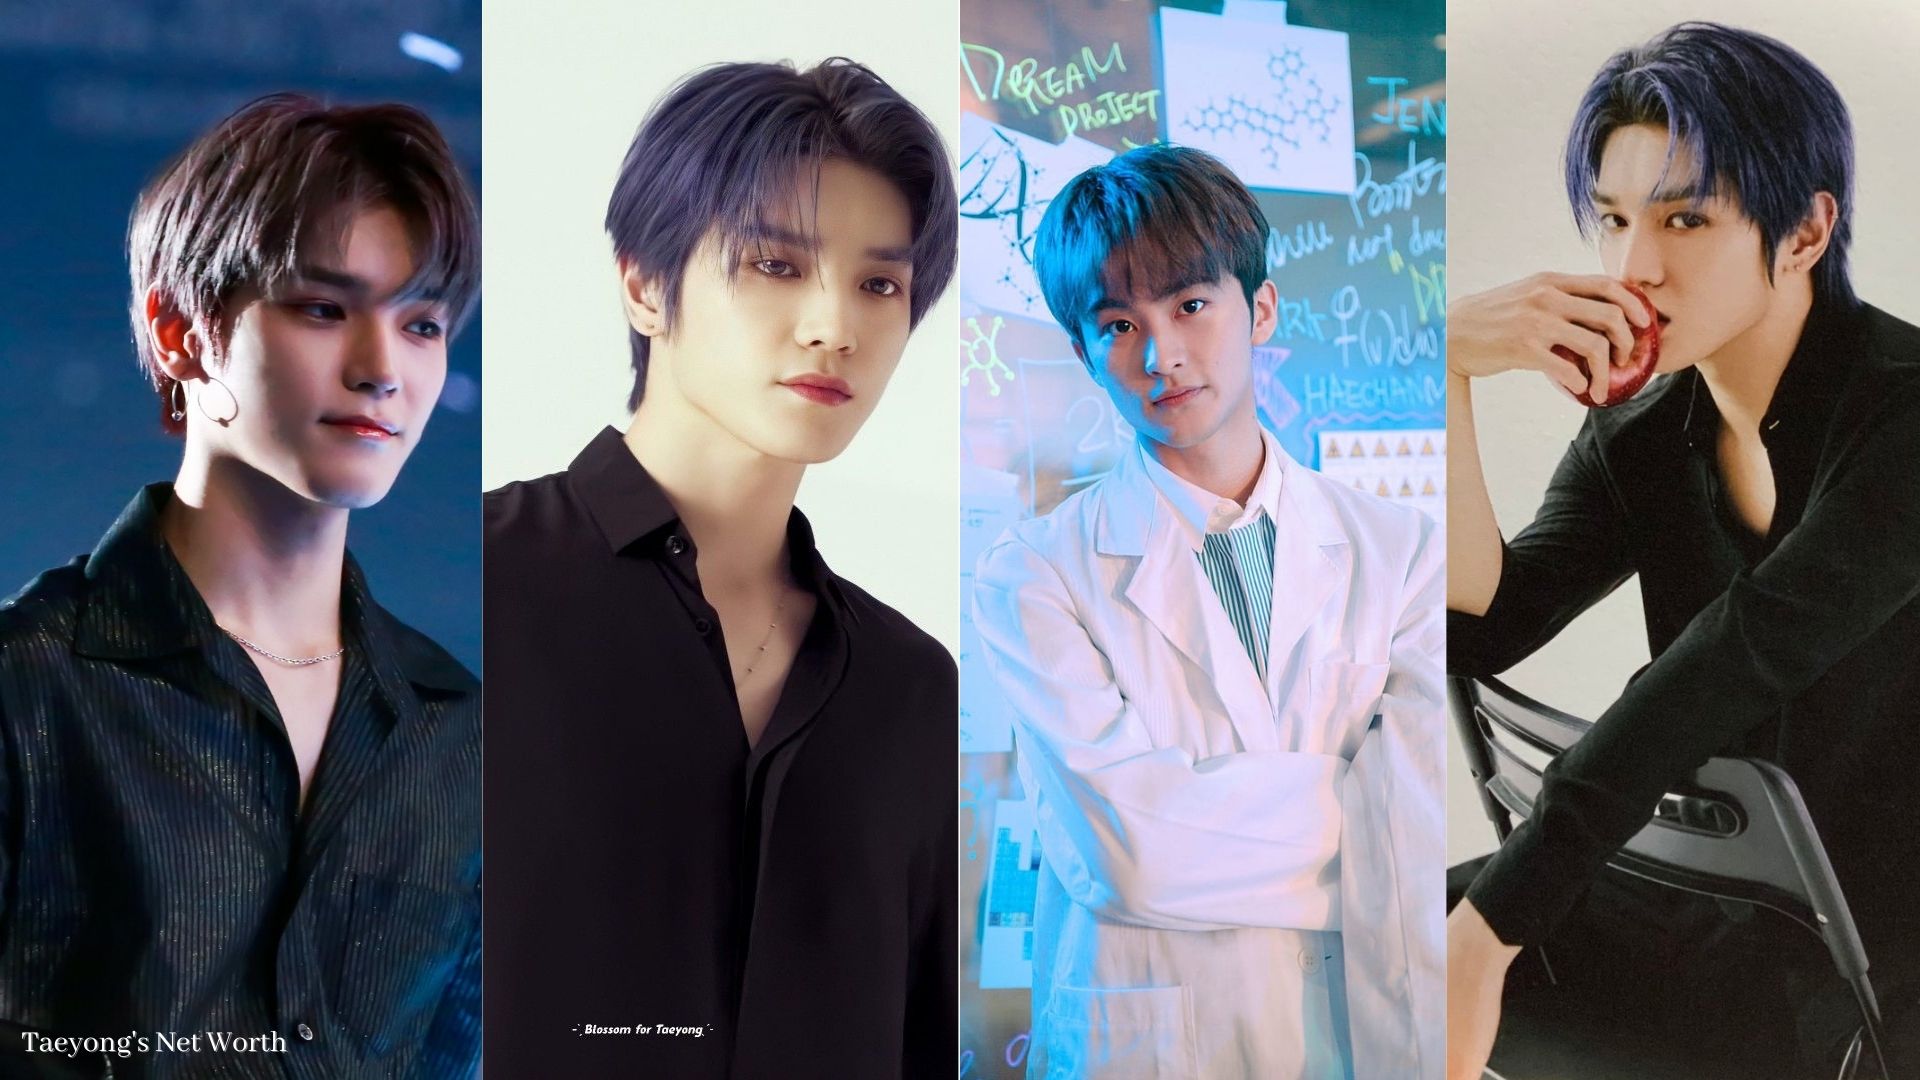 Taeyong’s Net Worth: How Rich Is the Leader of NCT?